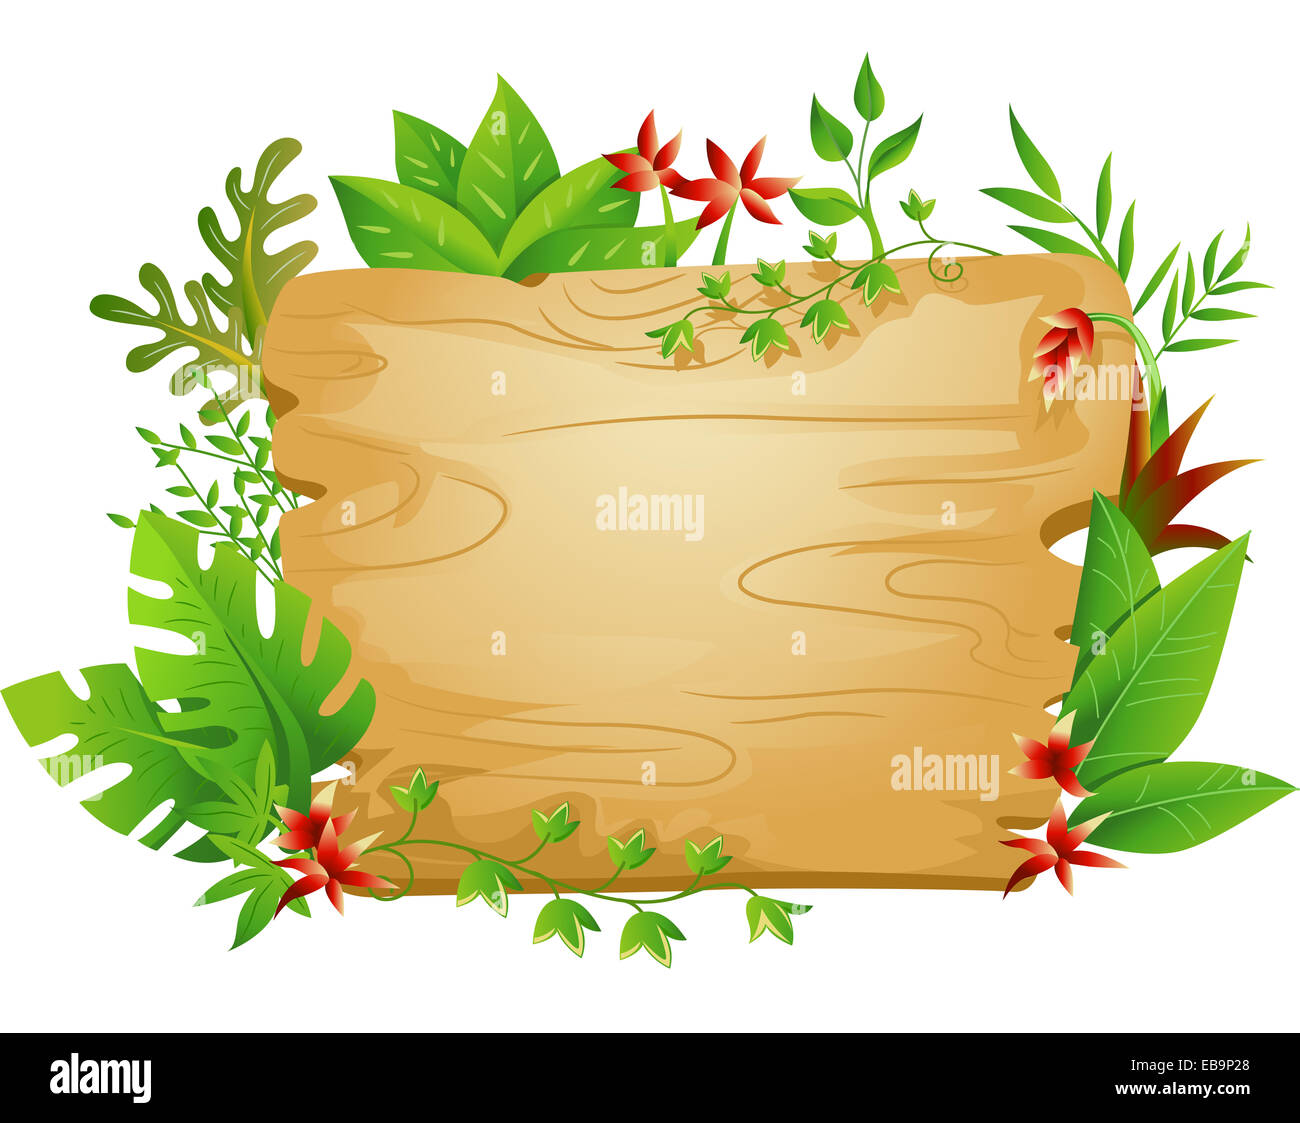 Border Illustration Featuring a Blank Board Surrounded by Jungle Plants Stock Photo